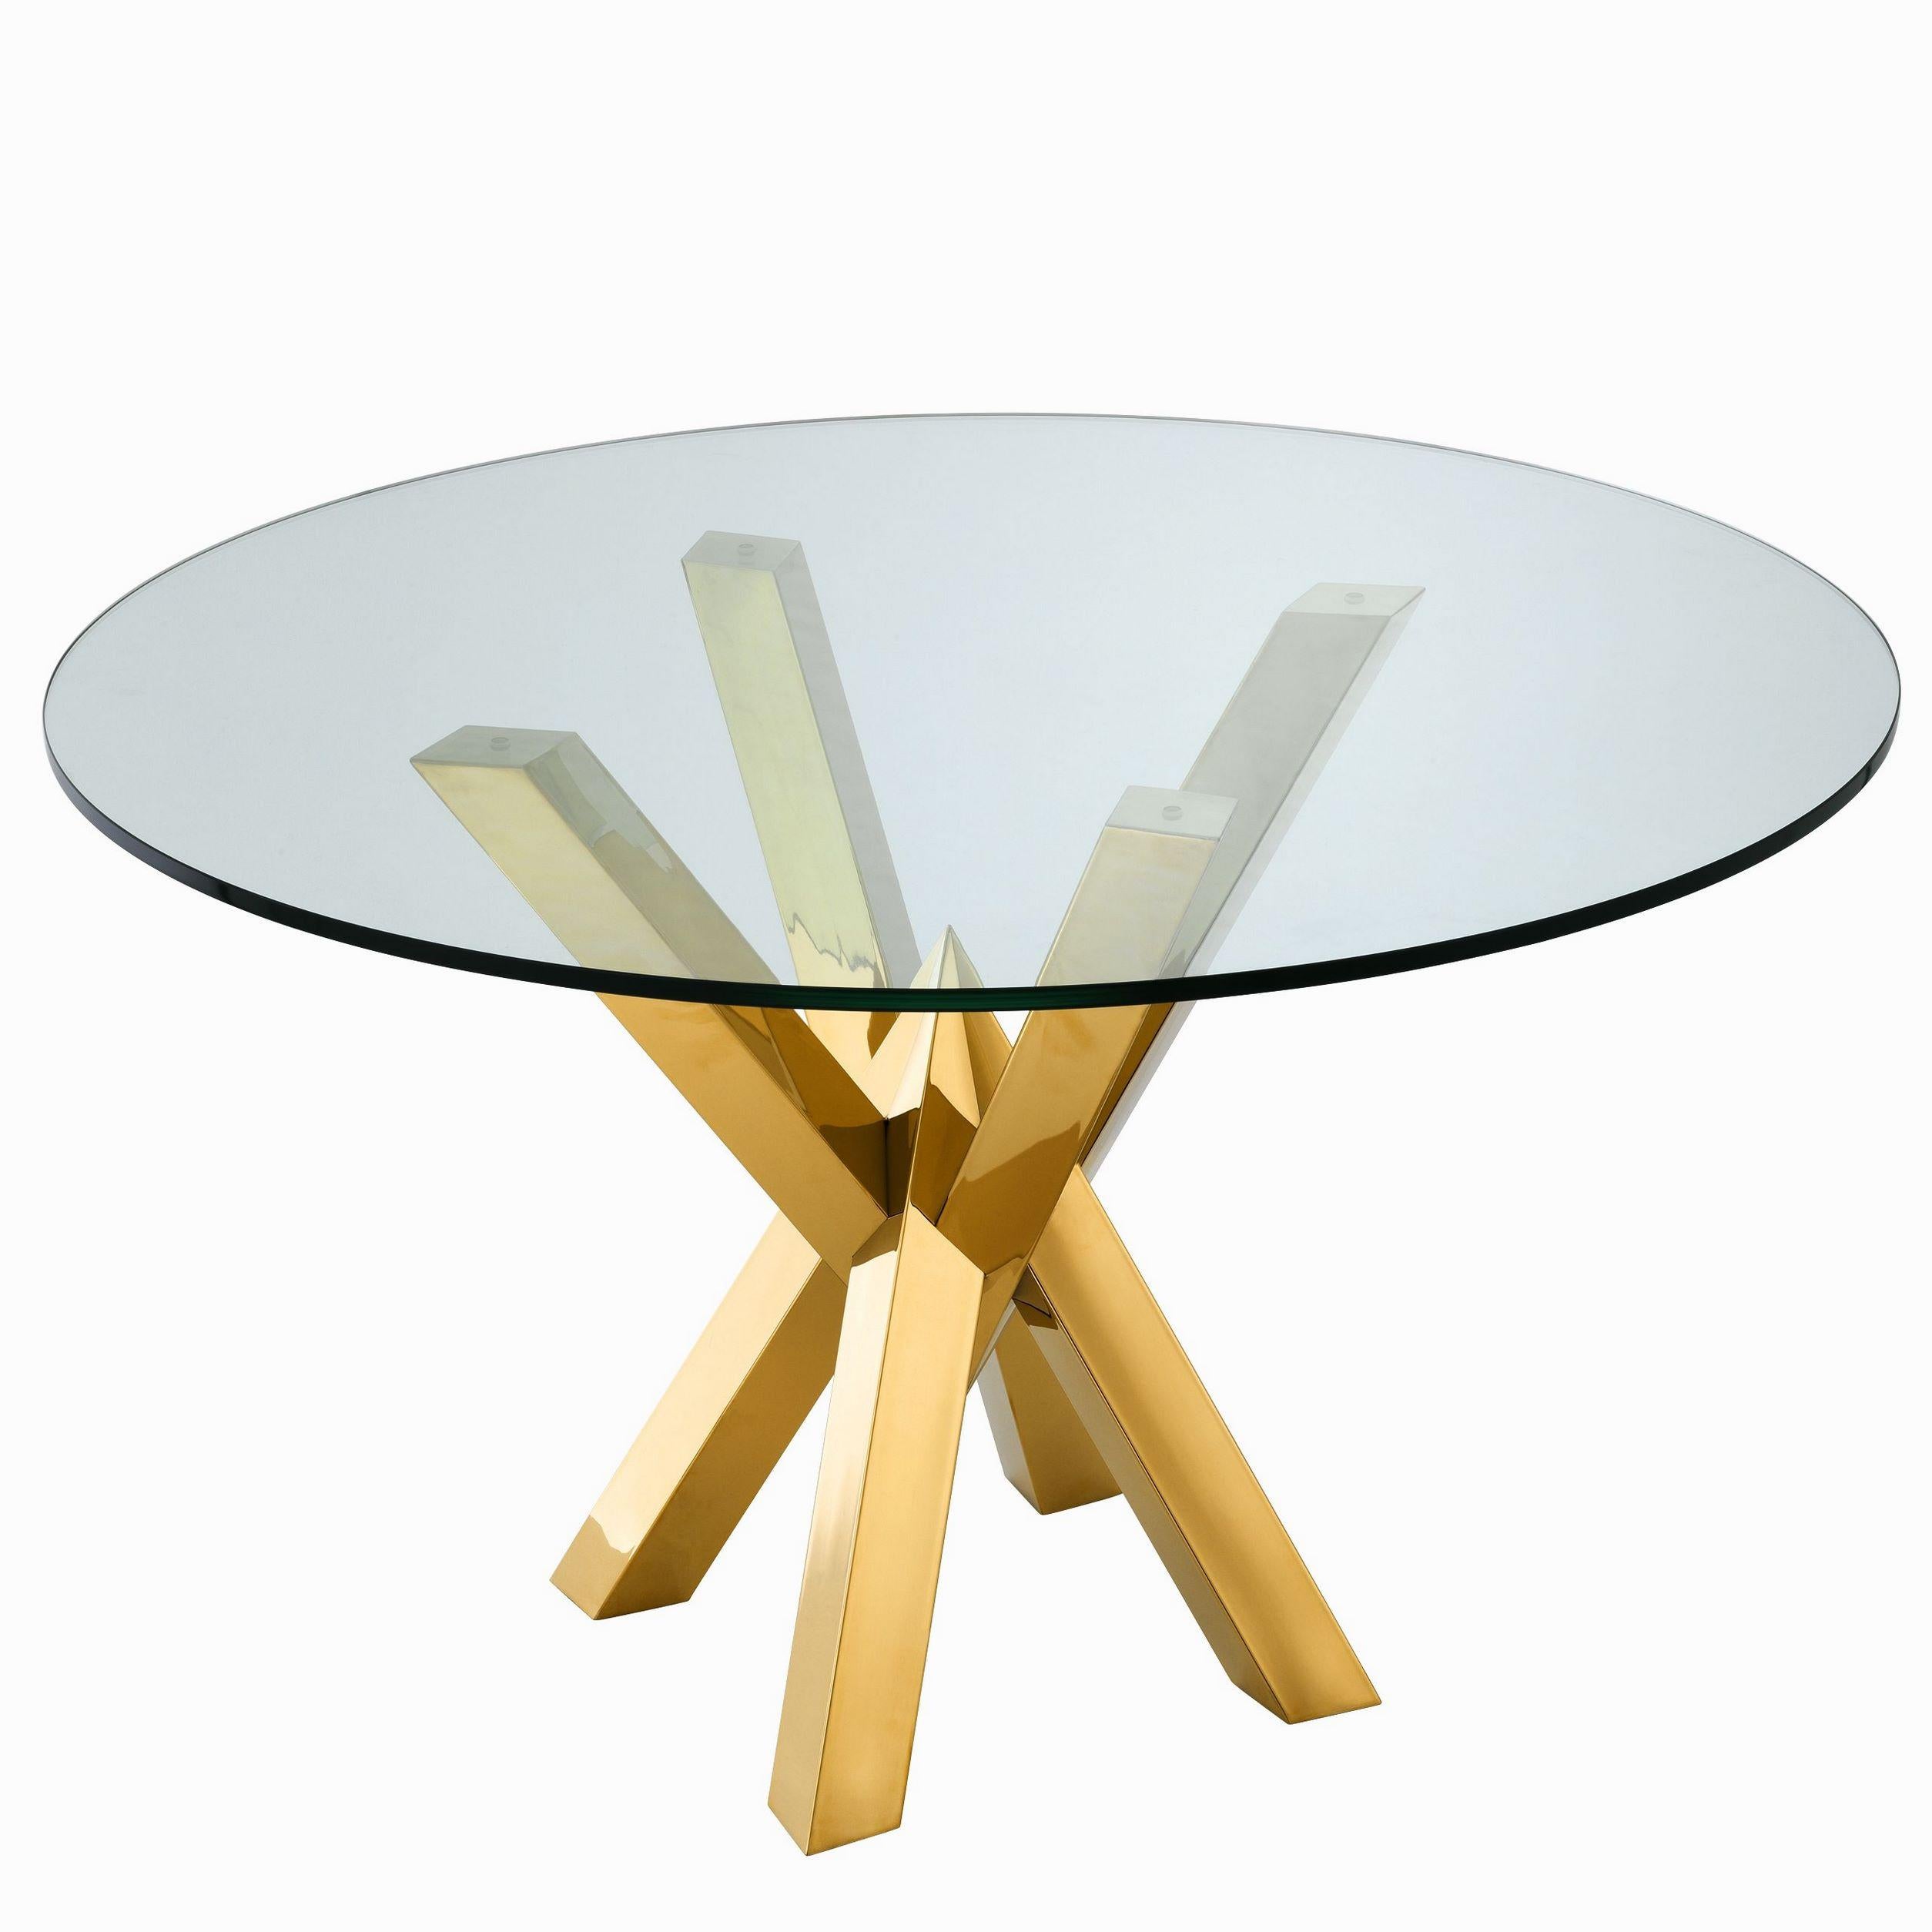 Gilded Stainless Steel and Glass Round Dining Pedestal Table In New Condition For Sale In Tourcoing, FR